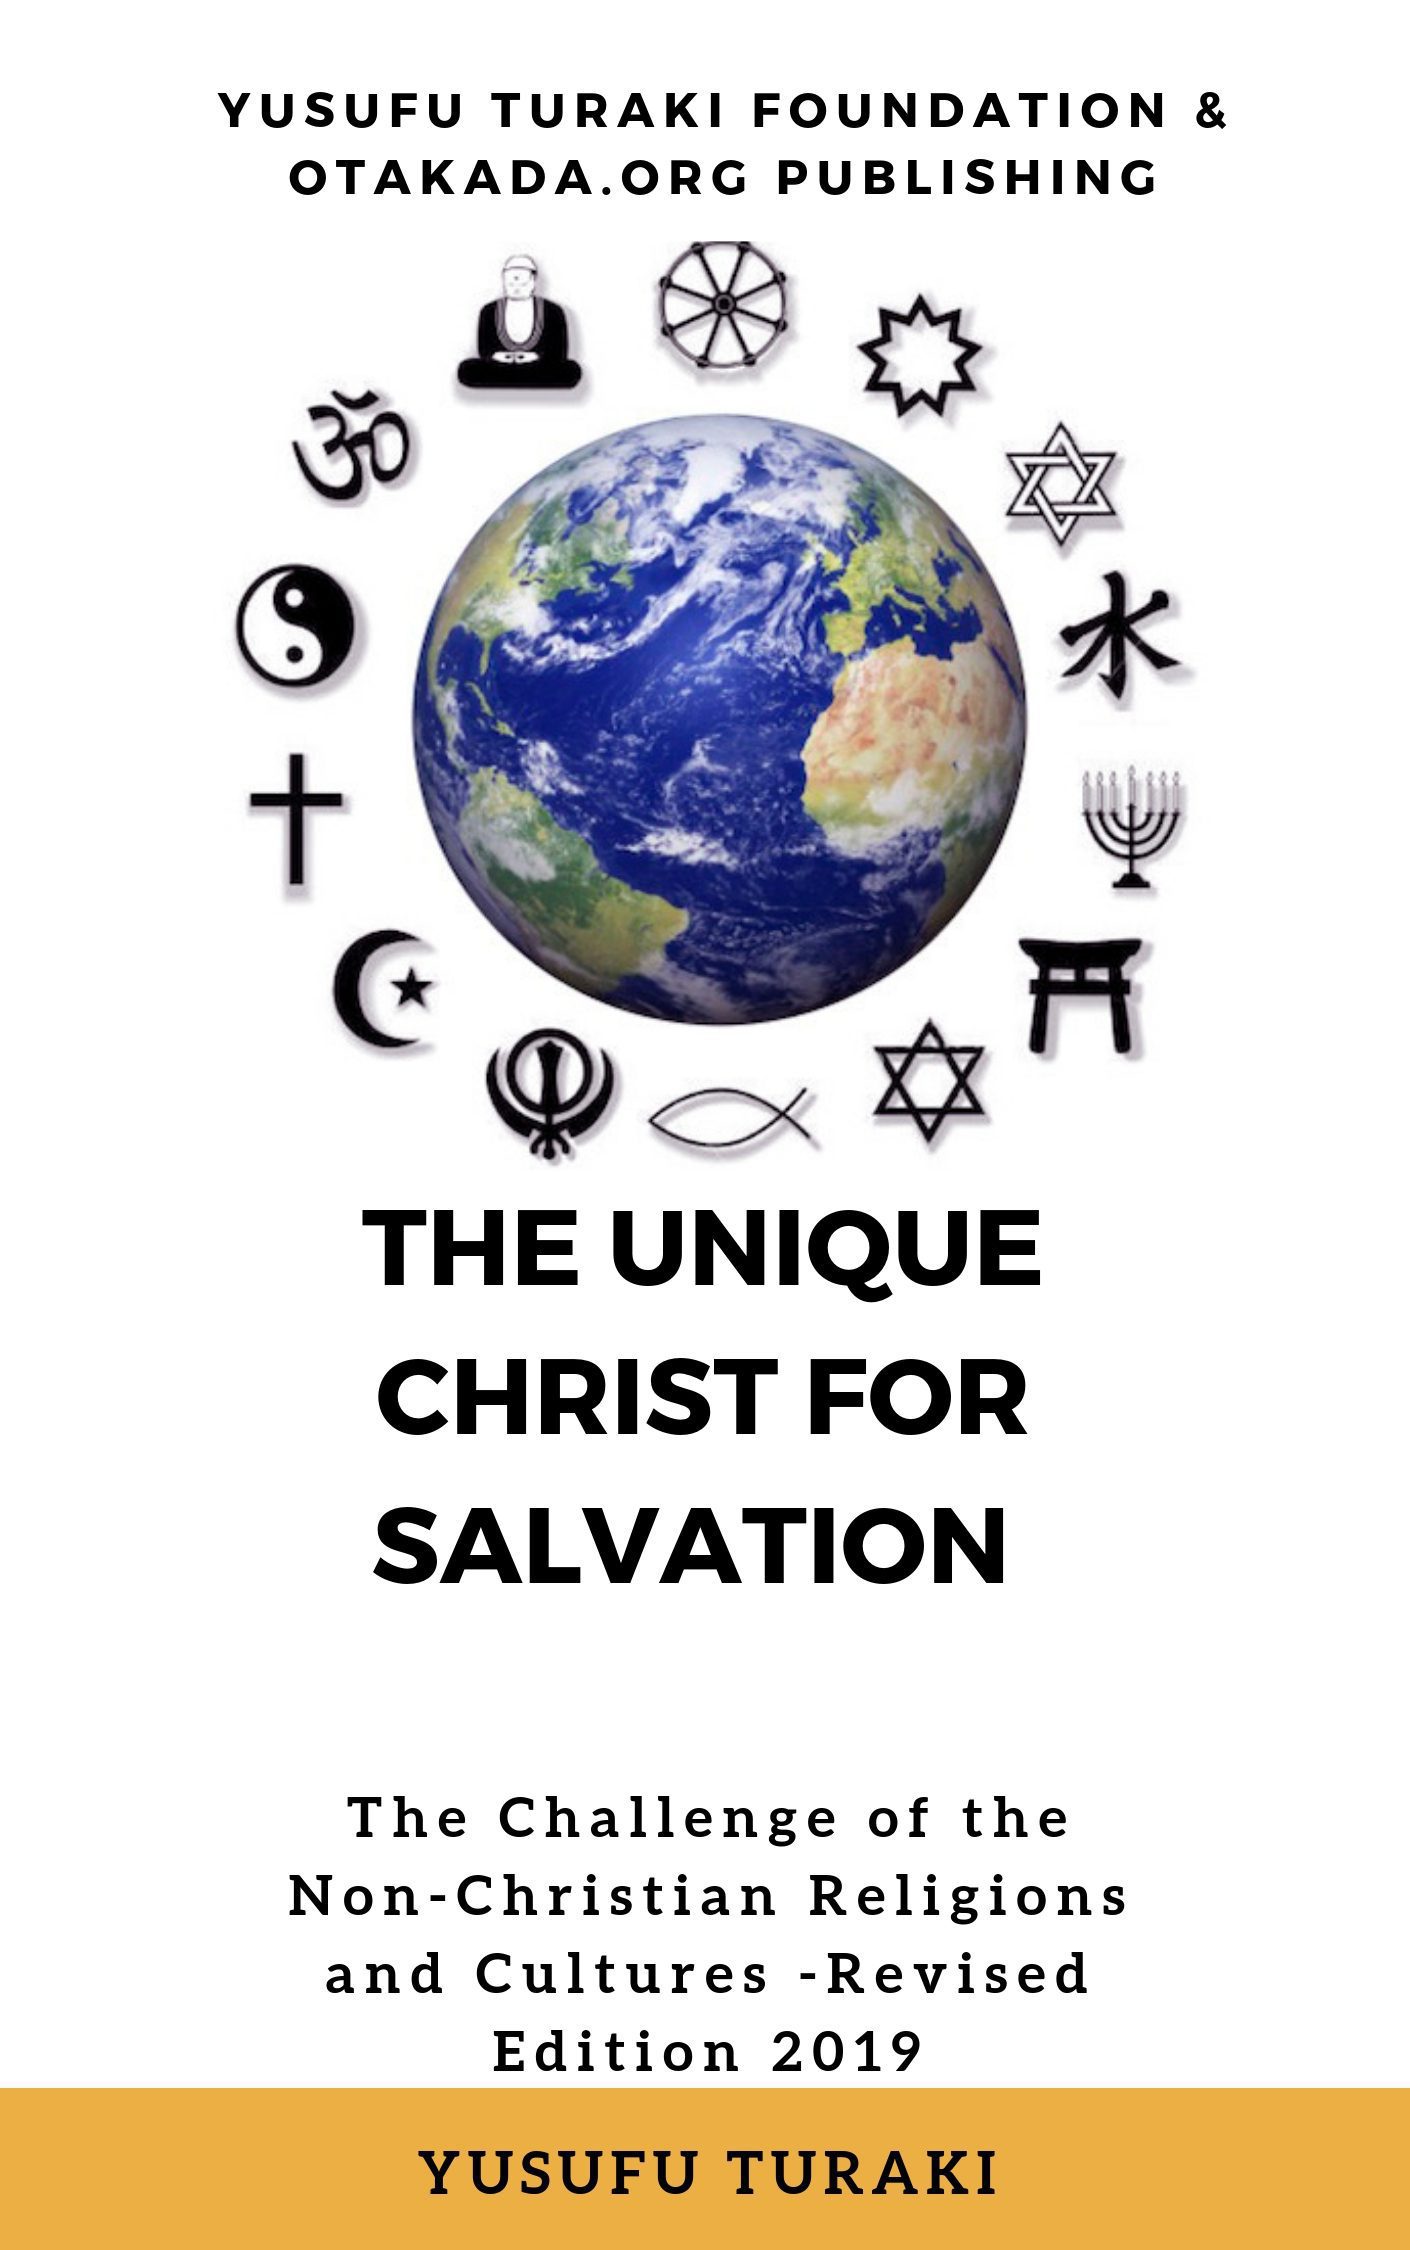 The Unique Christ For Salvation The Challenge of The Non-Christian Religions and Cultures